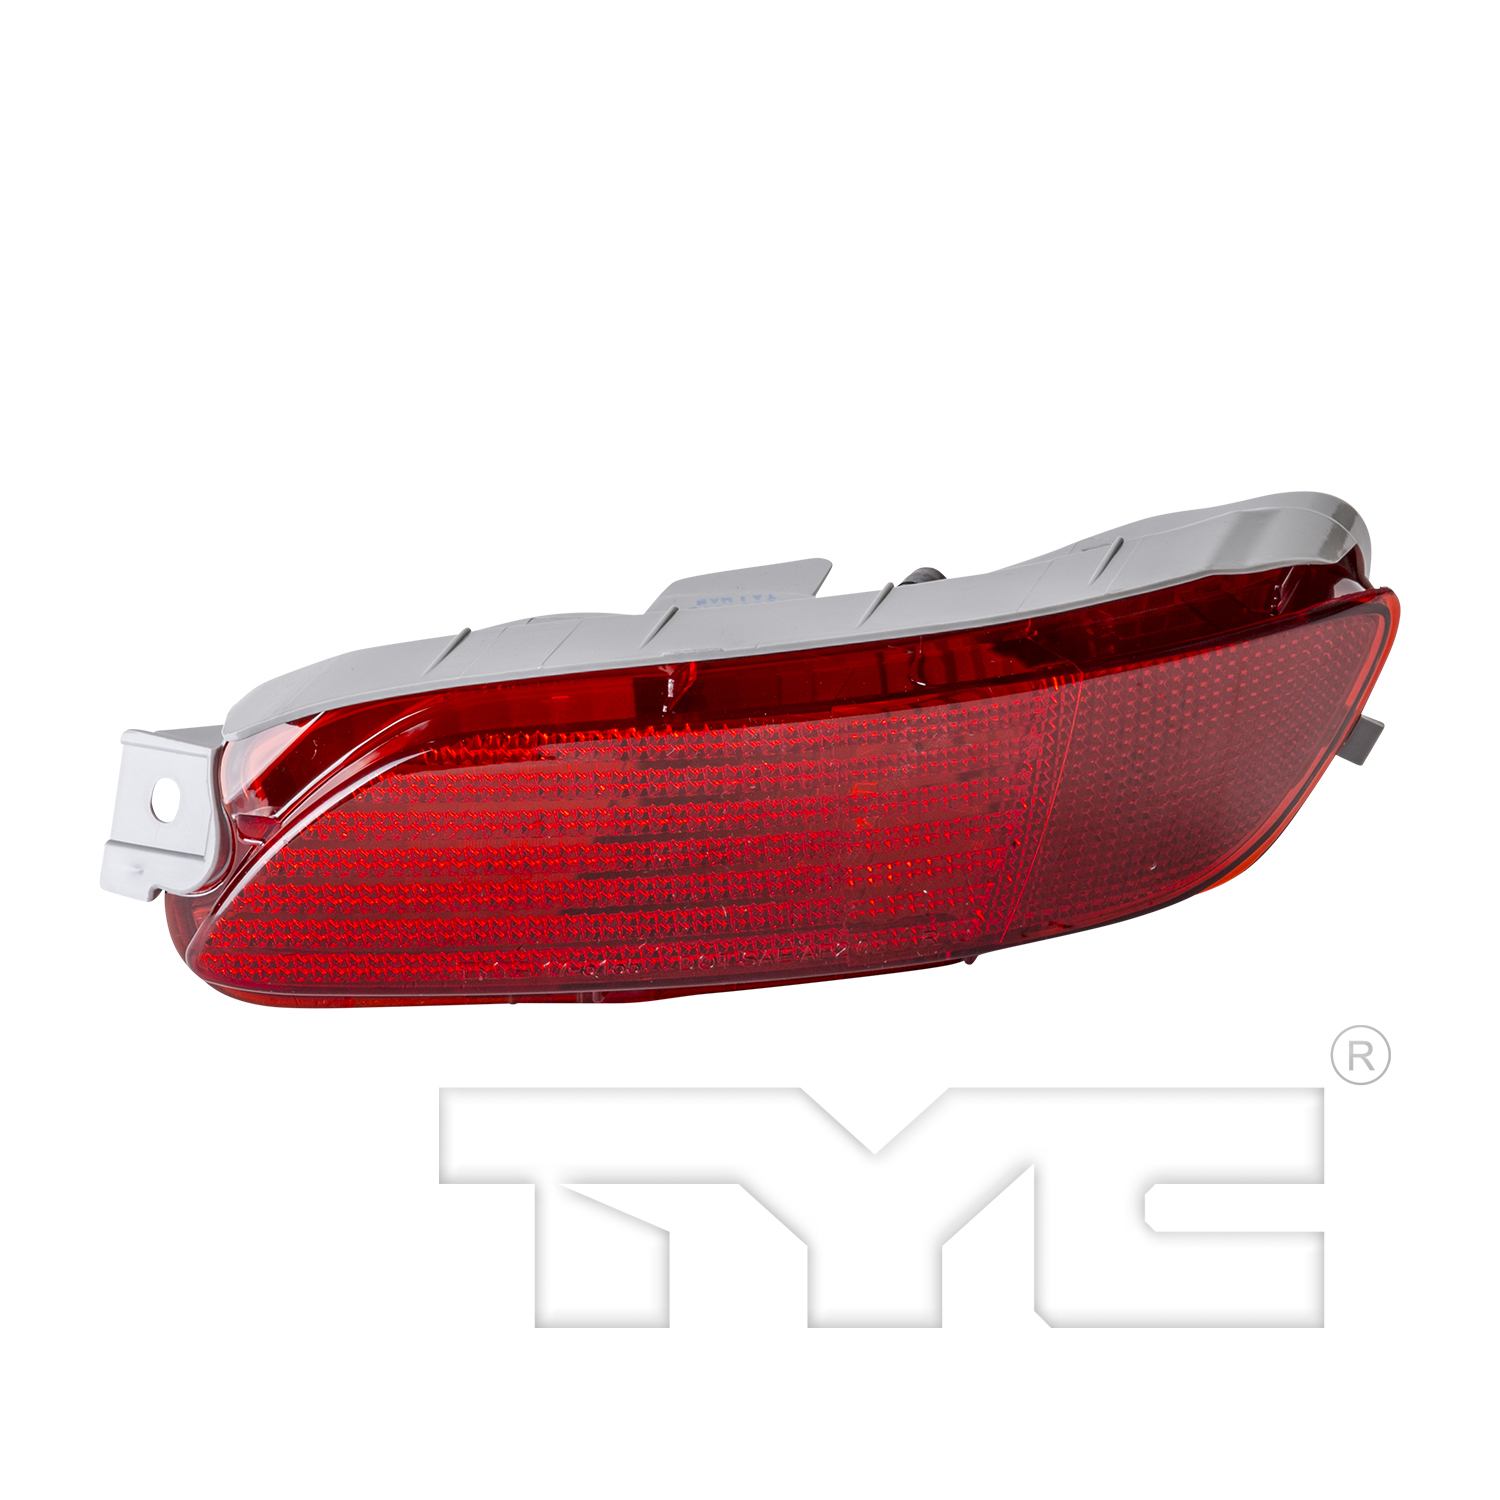 Aftermarket LAMPS for LEXUS - RX350, RX350,07-09,RT Rear marker lamp assy